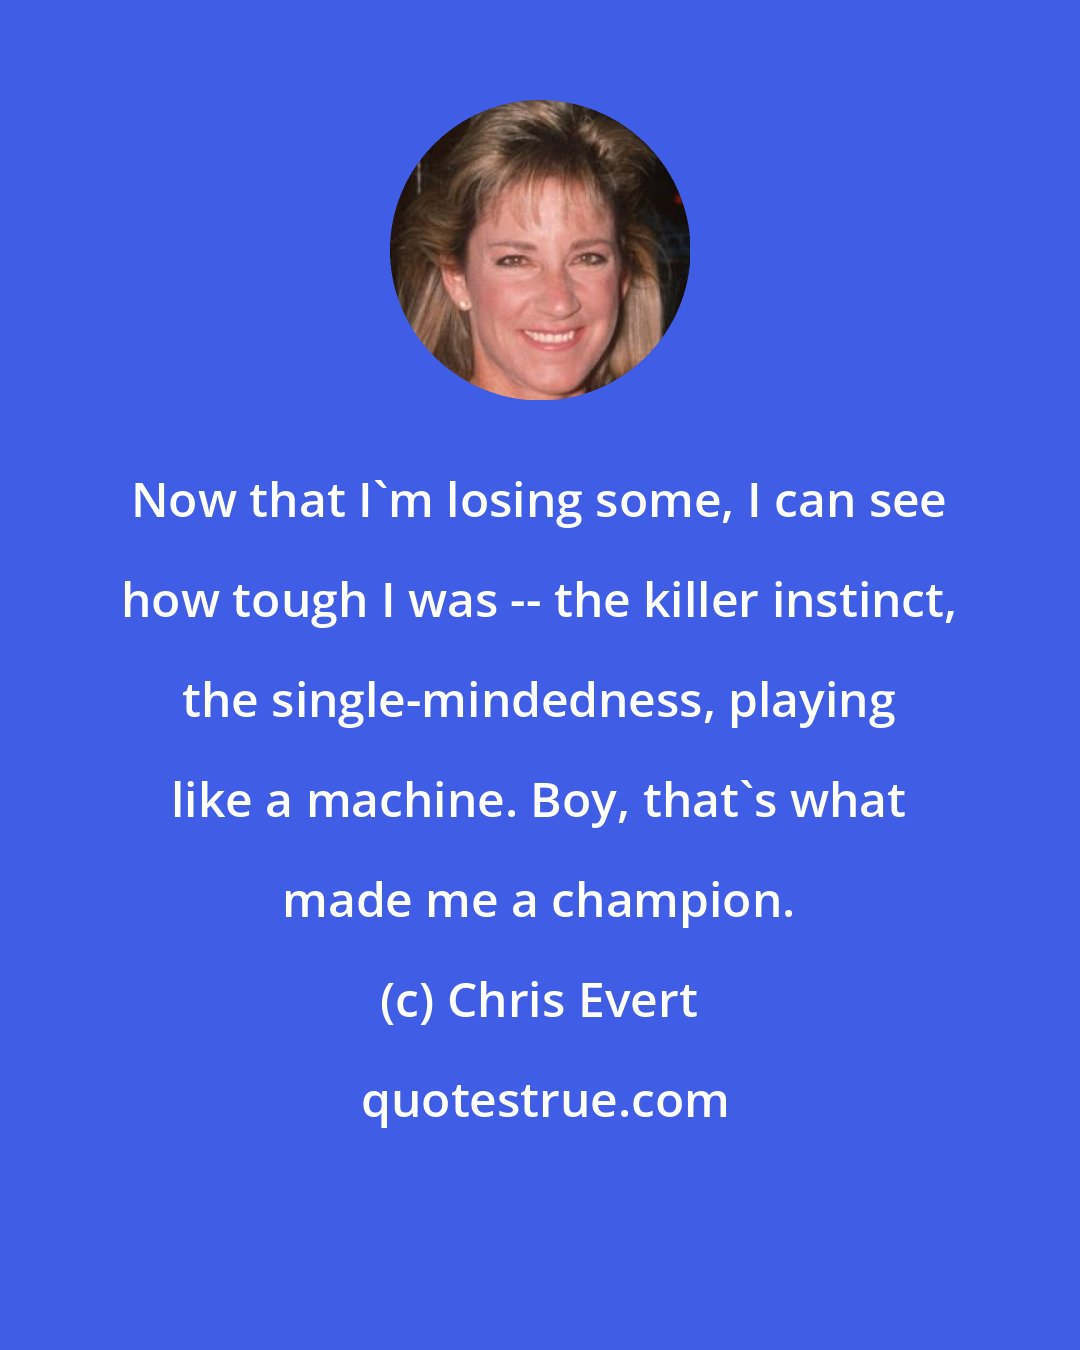 Chris Evert: Now that I'm losing some, I can see how tough I was -- the killer instinct, the single-mindedness, playing like a machine. Boy, that's what made me a champion.